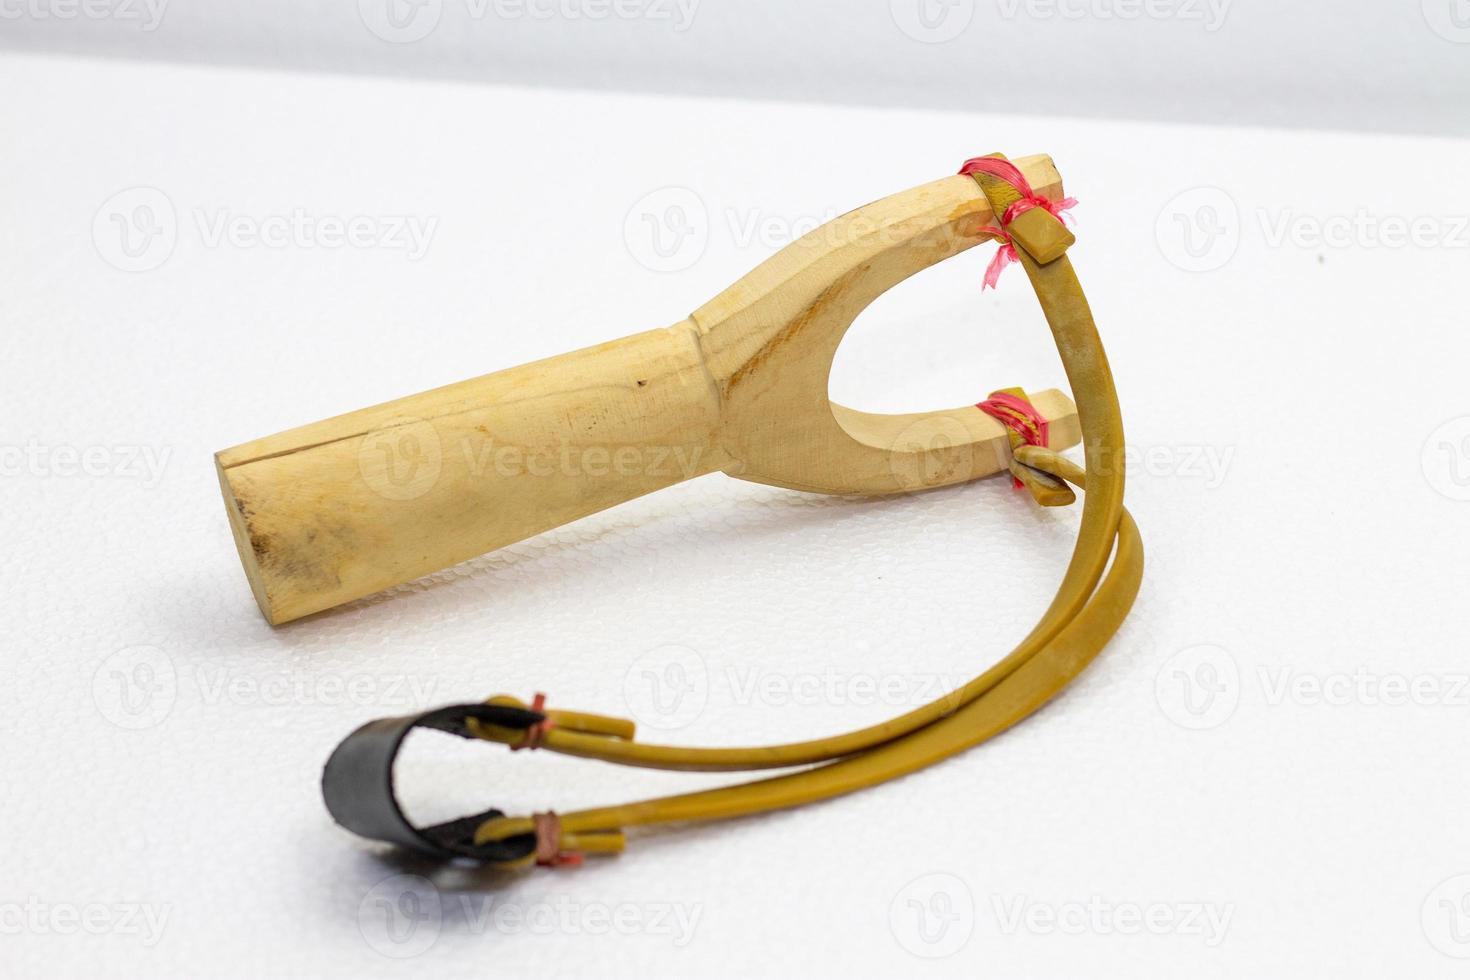 Handmade slingshot catapult. Y-shaped wooden stick with elastic tied between two top parts. Slingshot or Catapult is device for shooting small stones. photo